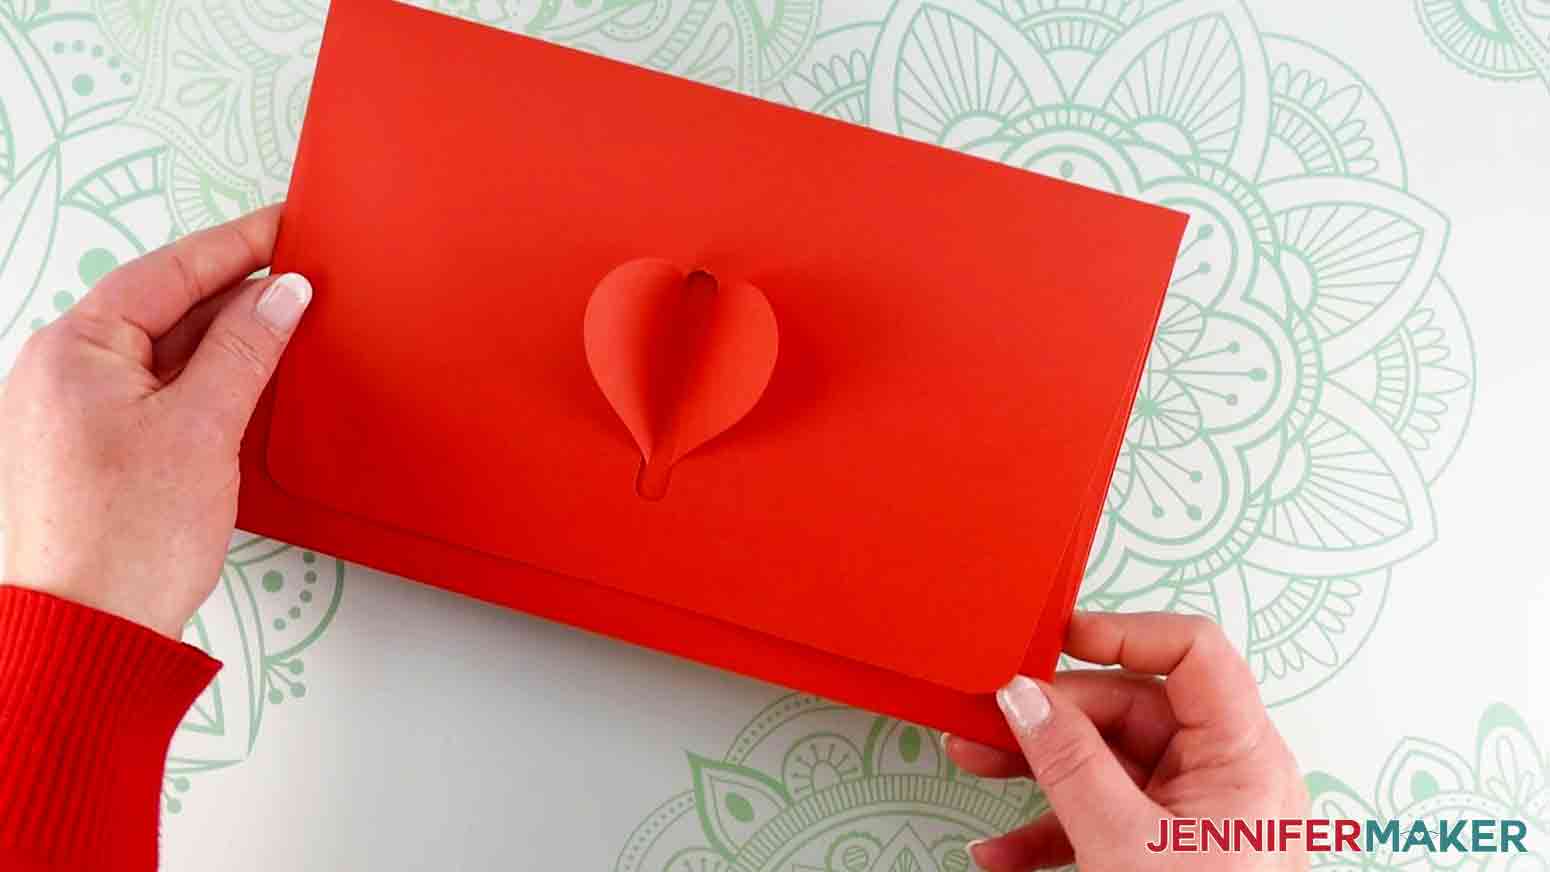 The heart design complete for how to make an envelope